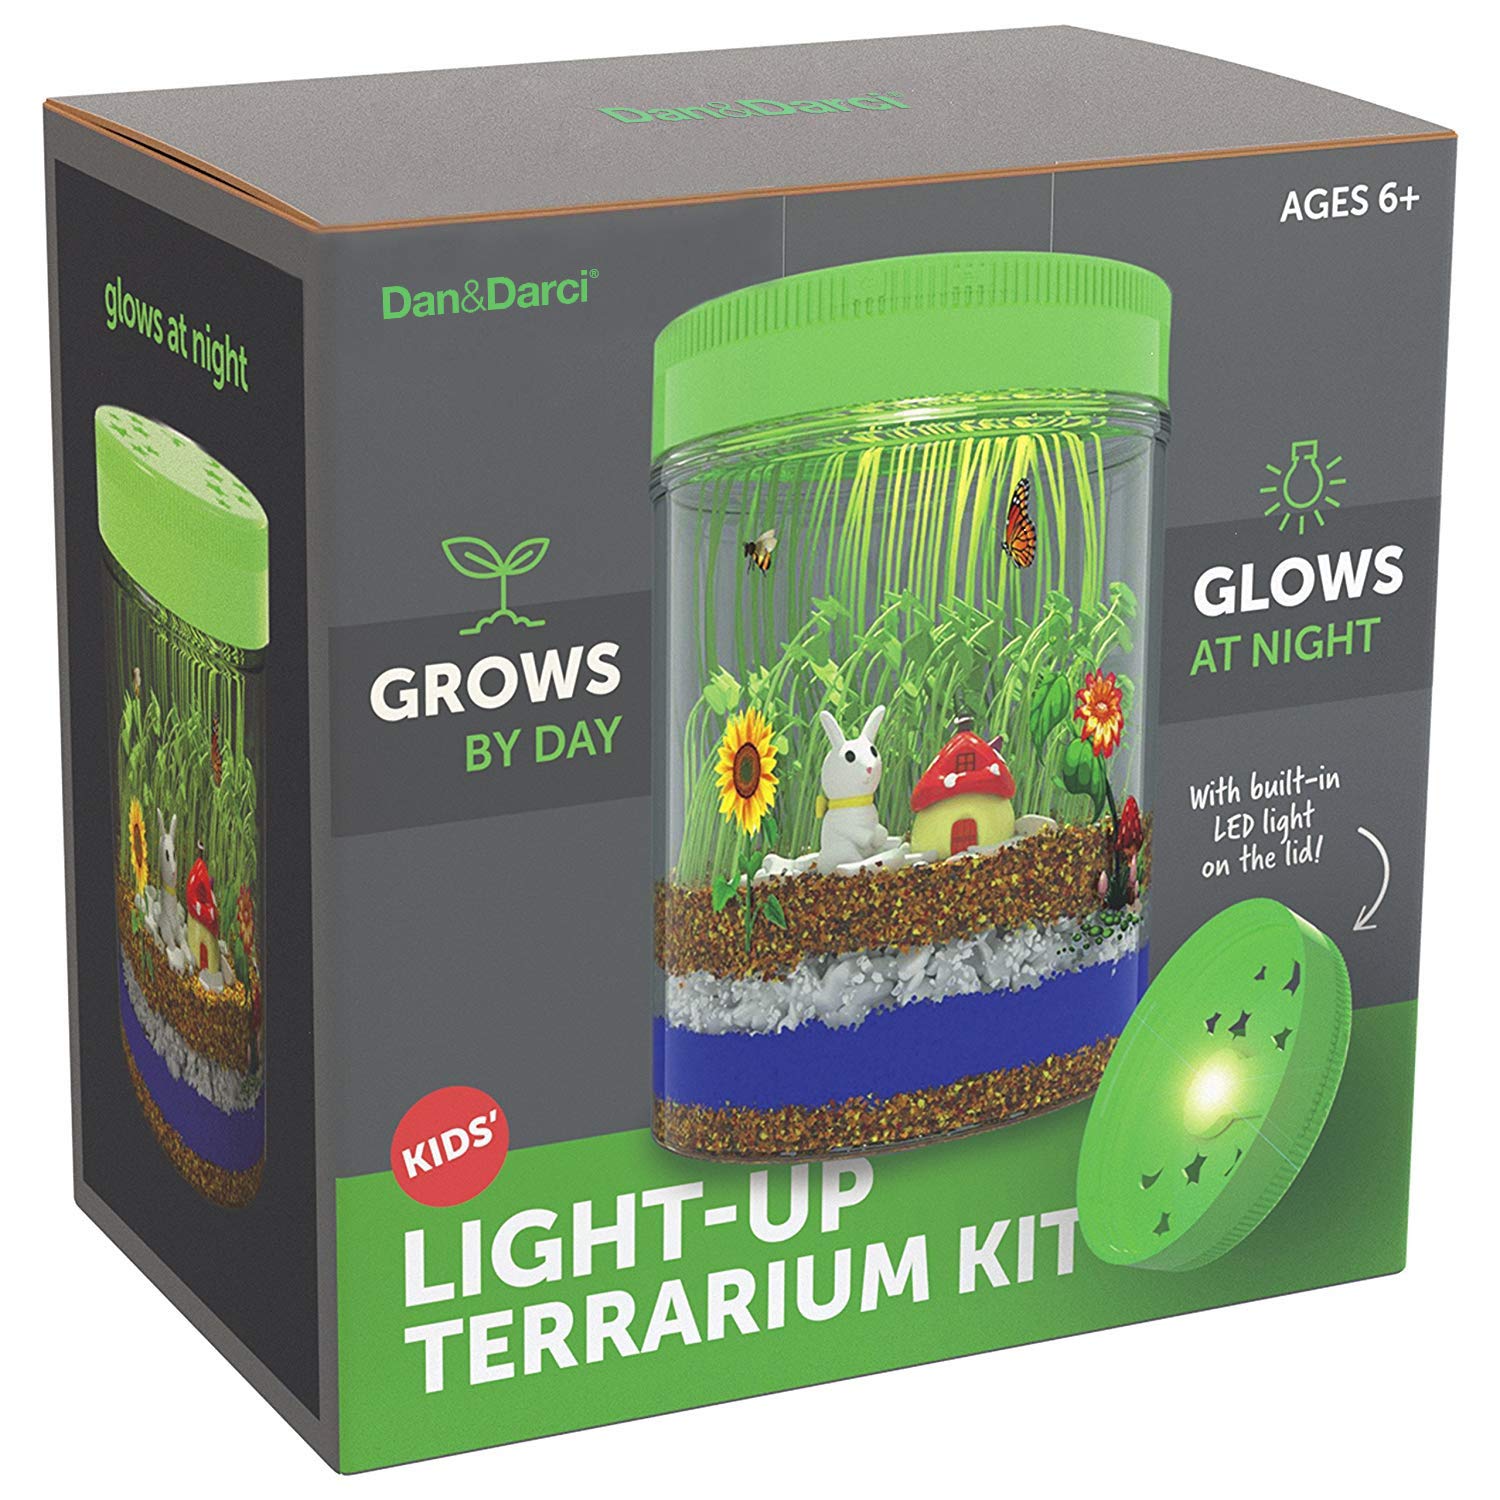 Light-Up Terrarium Kit for Kids - STEM Activities Science Craft Kits - Kids Crafts Gifts for Kids - Educational Kids Toys - Arts and Crafts for Girls & Boys Ages 4 5 6 7 8-12 Year Old Boy & Girl Gift